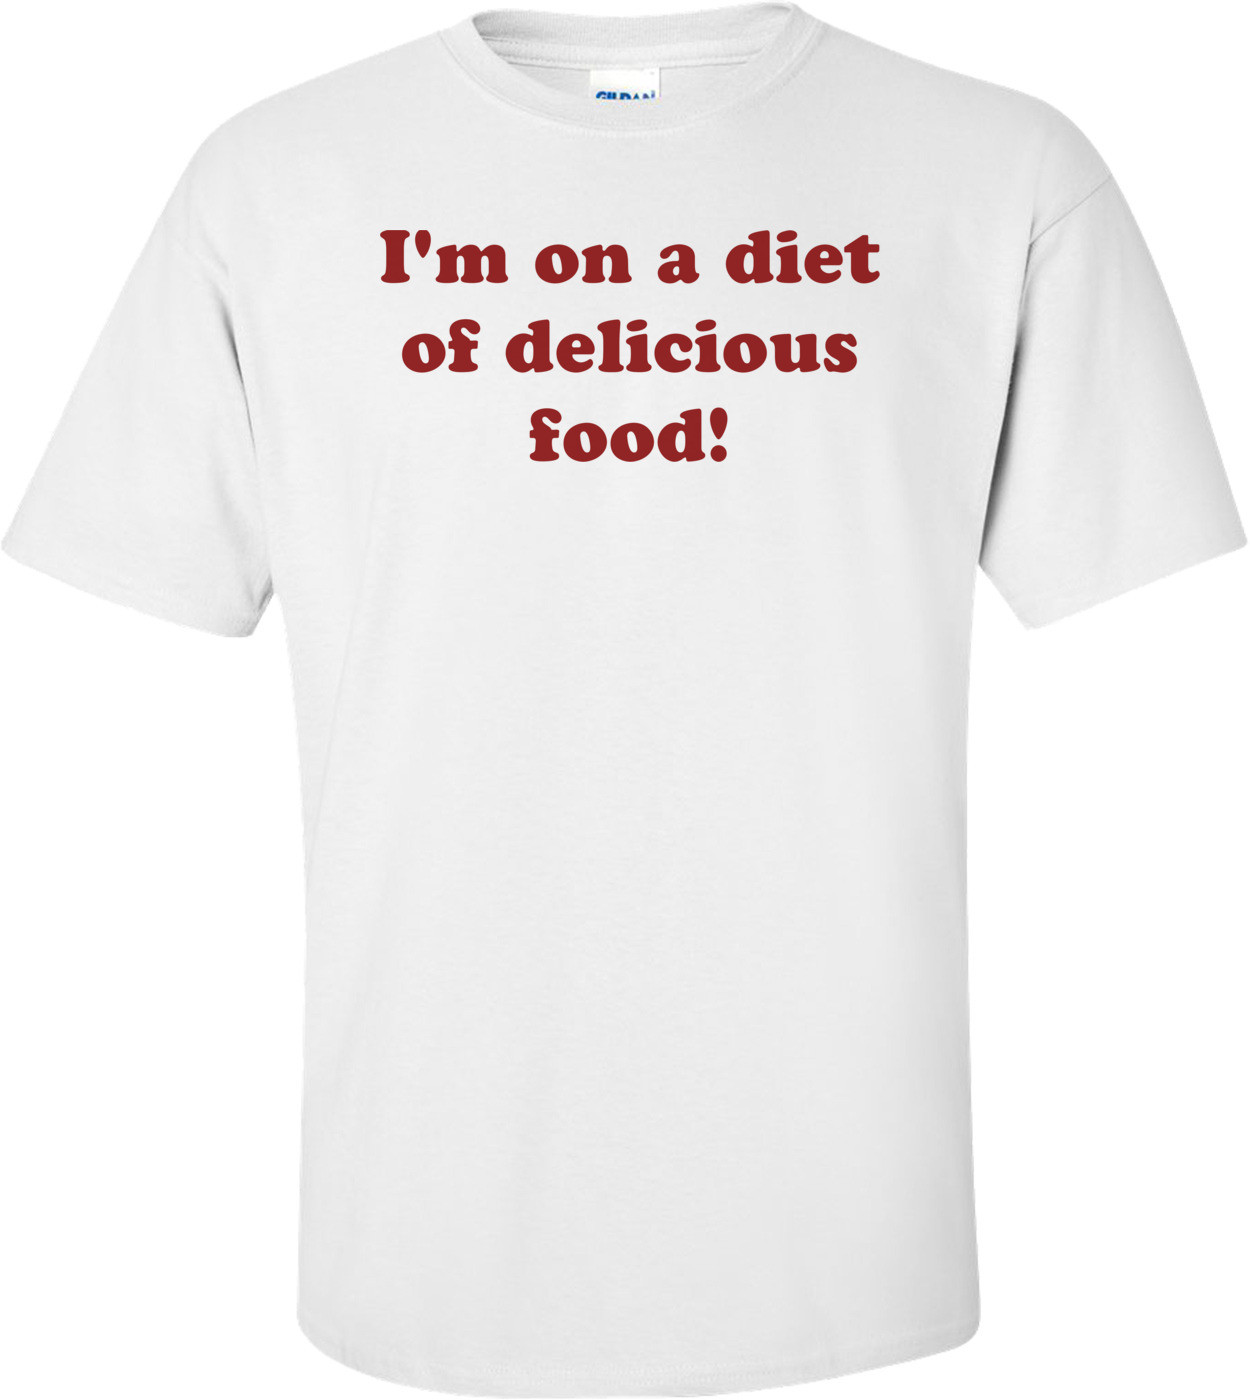 I'm on a diet of delicious food! Shirt